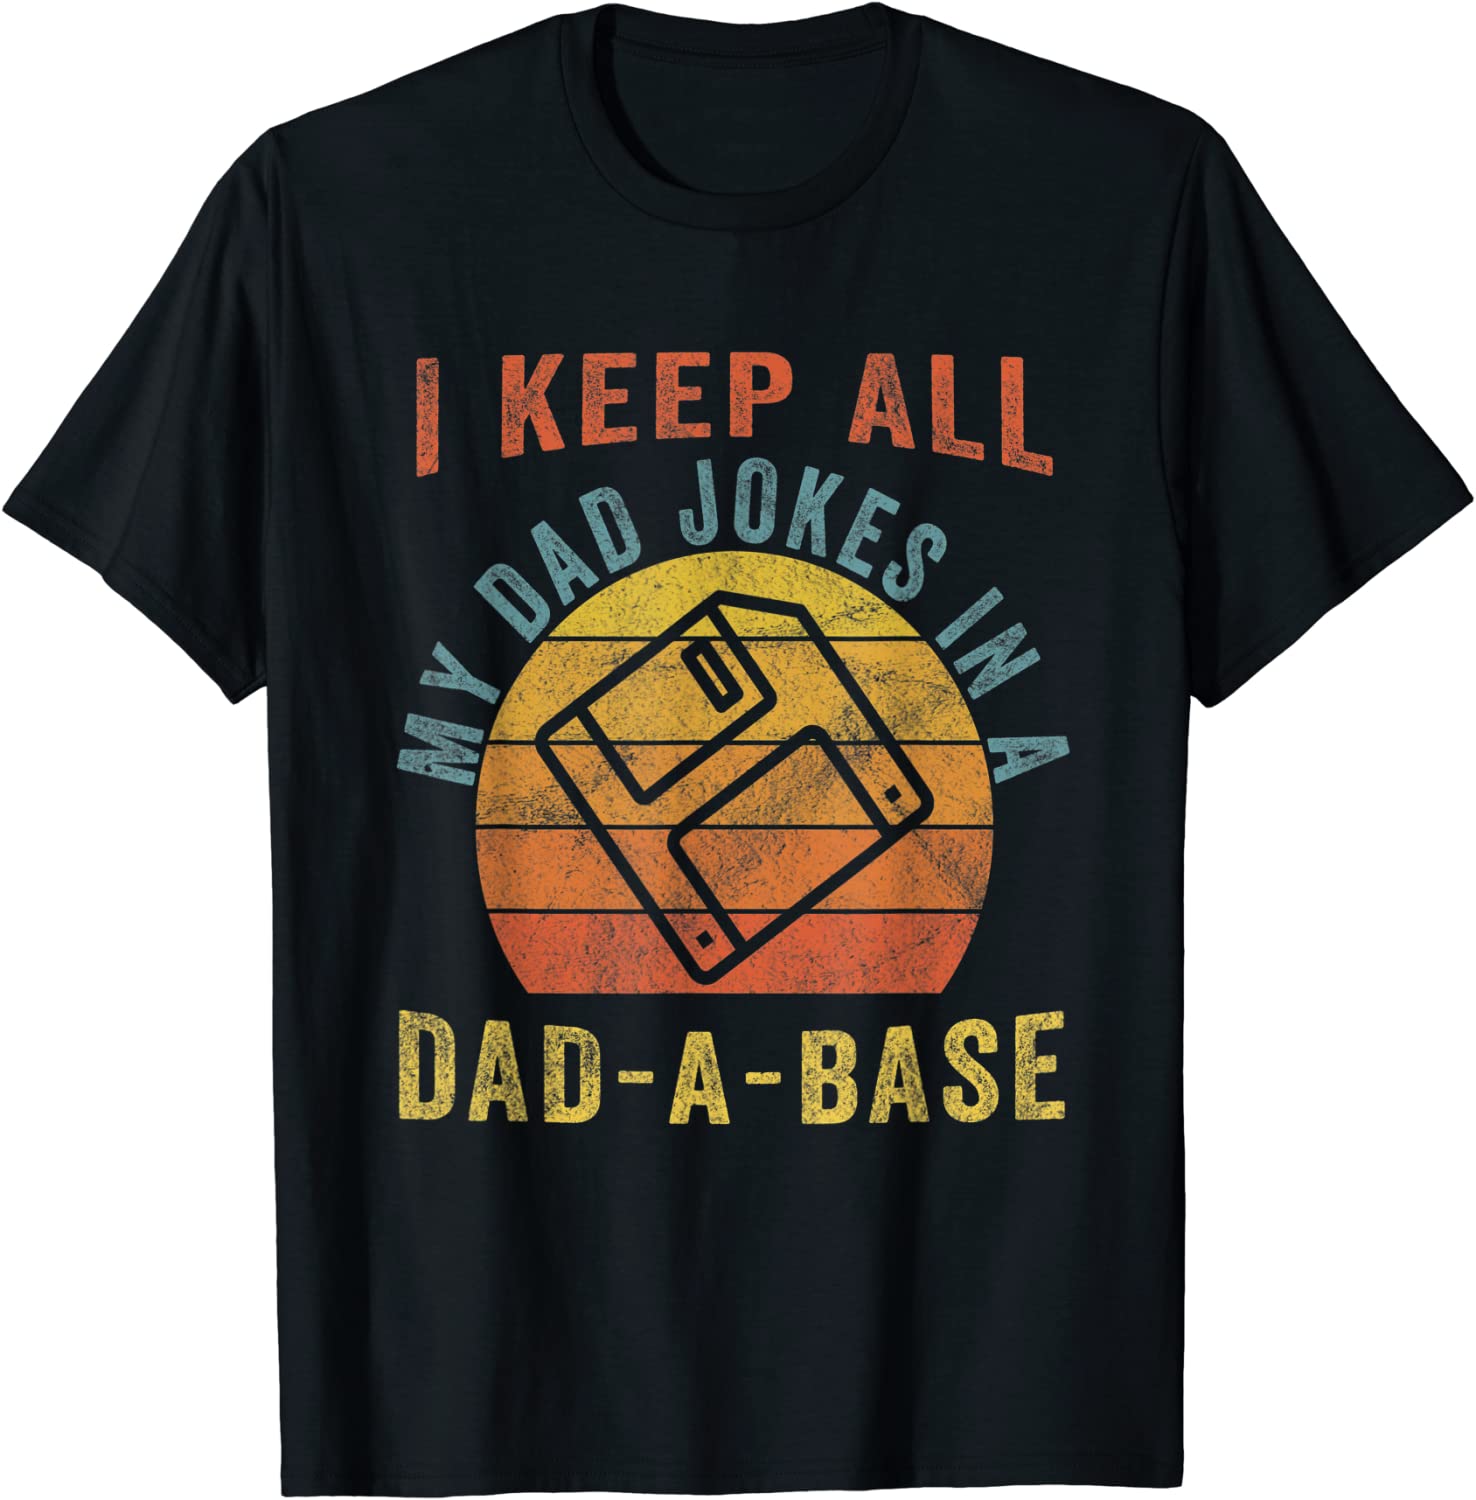 Mens I Keep All My Dad Jokes In A Dad-A-Base Vintage Pattern Father Dad T-Shirt Black Tshirt - image 1 of 4